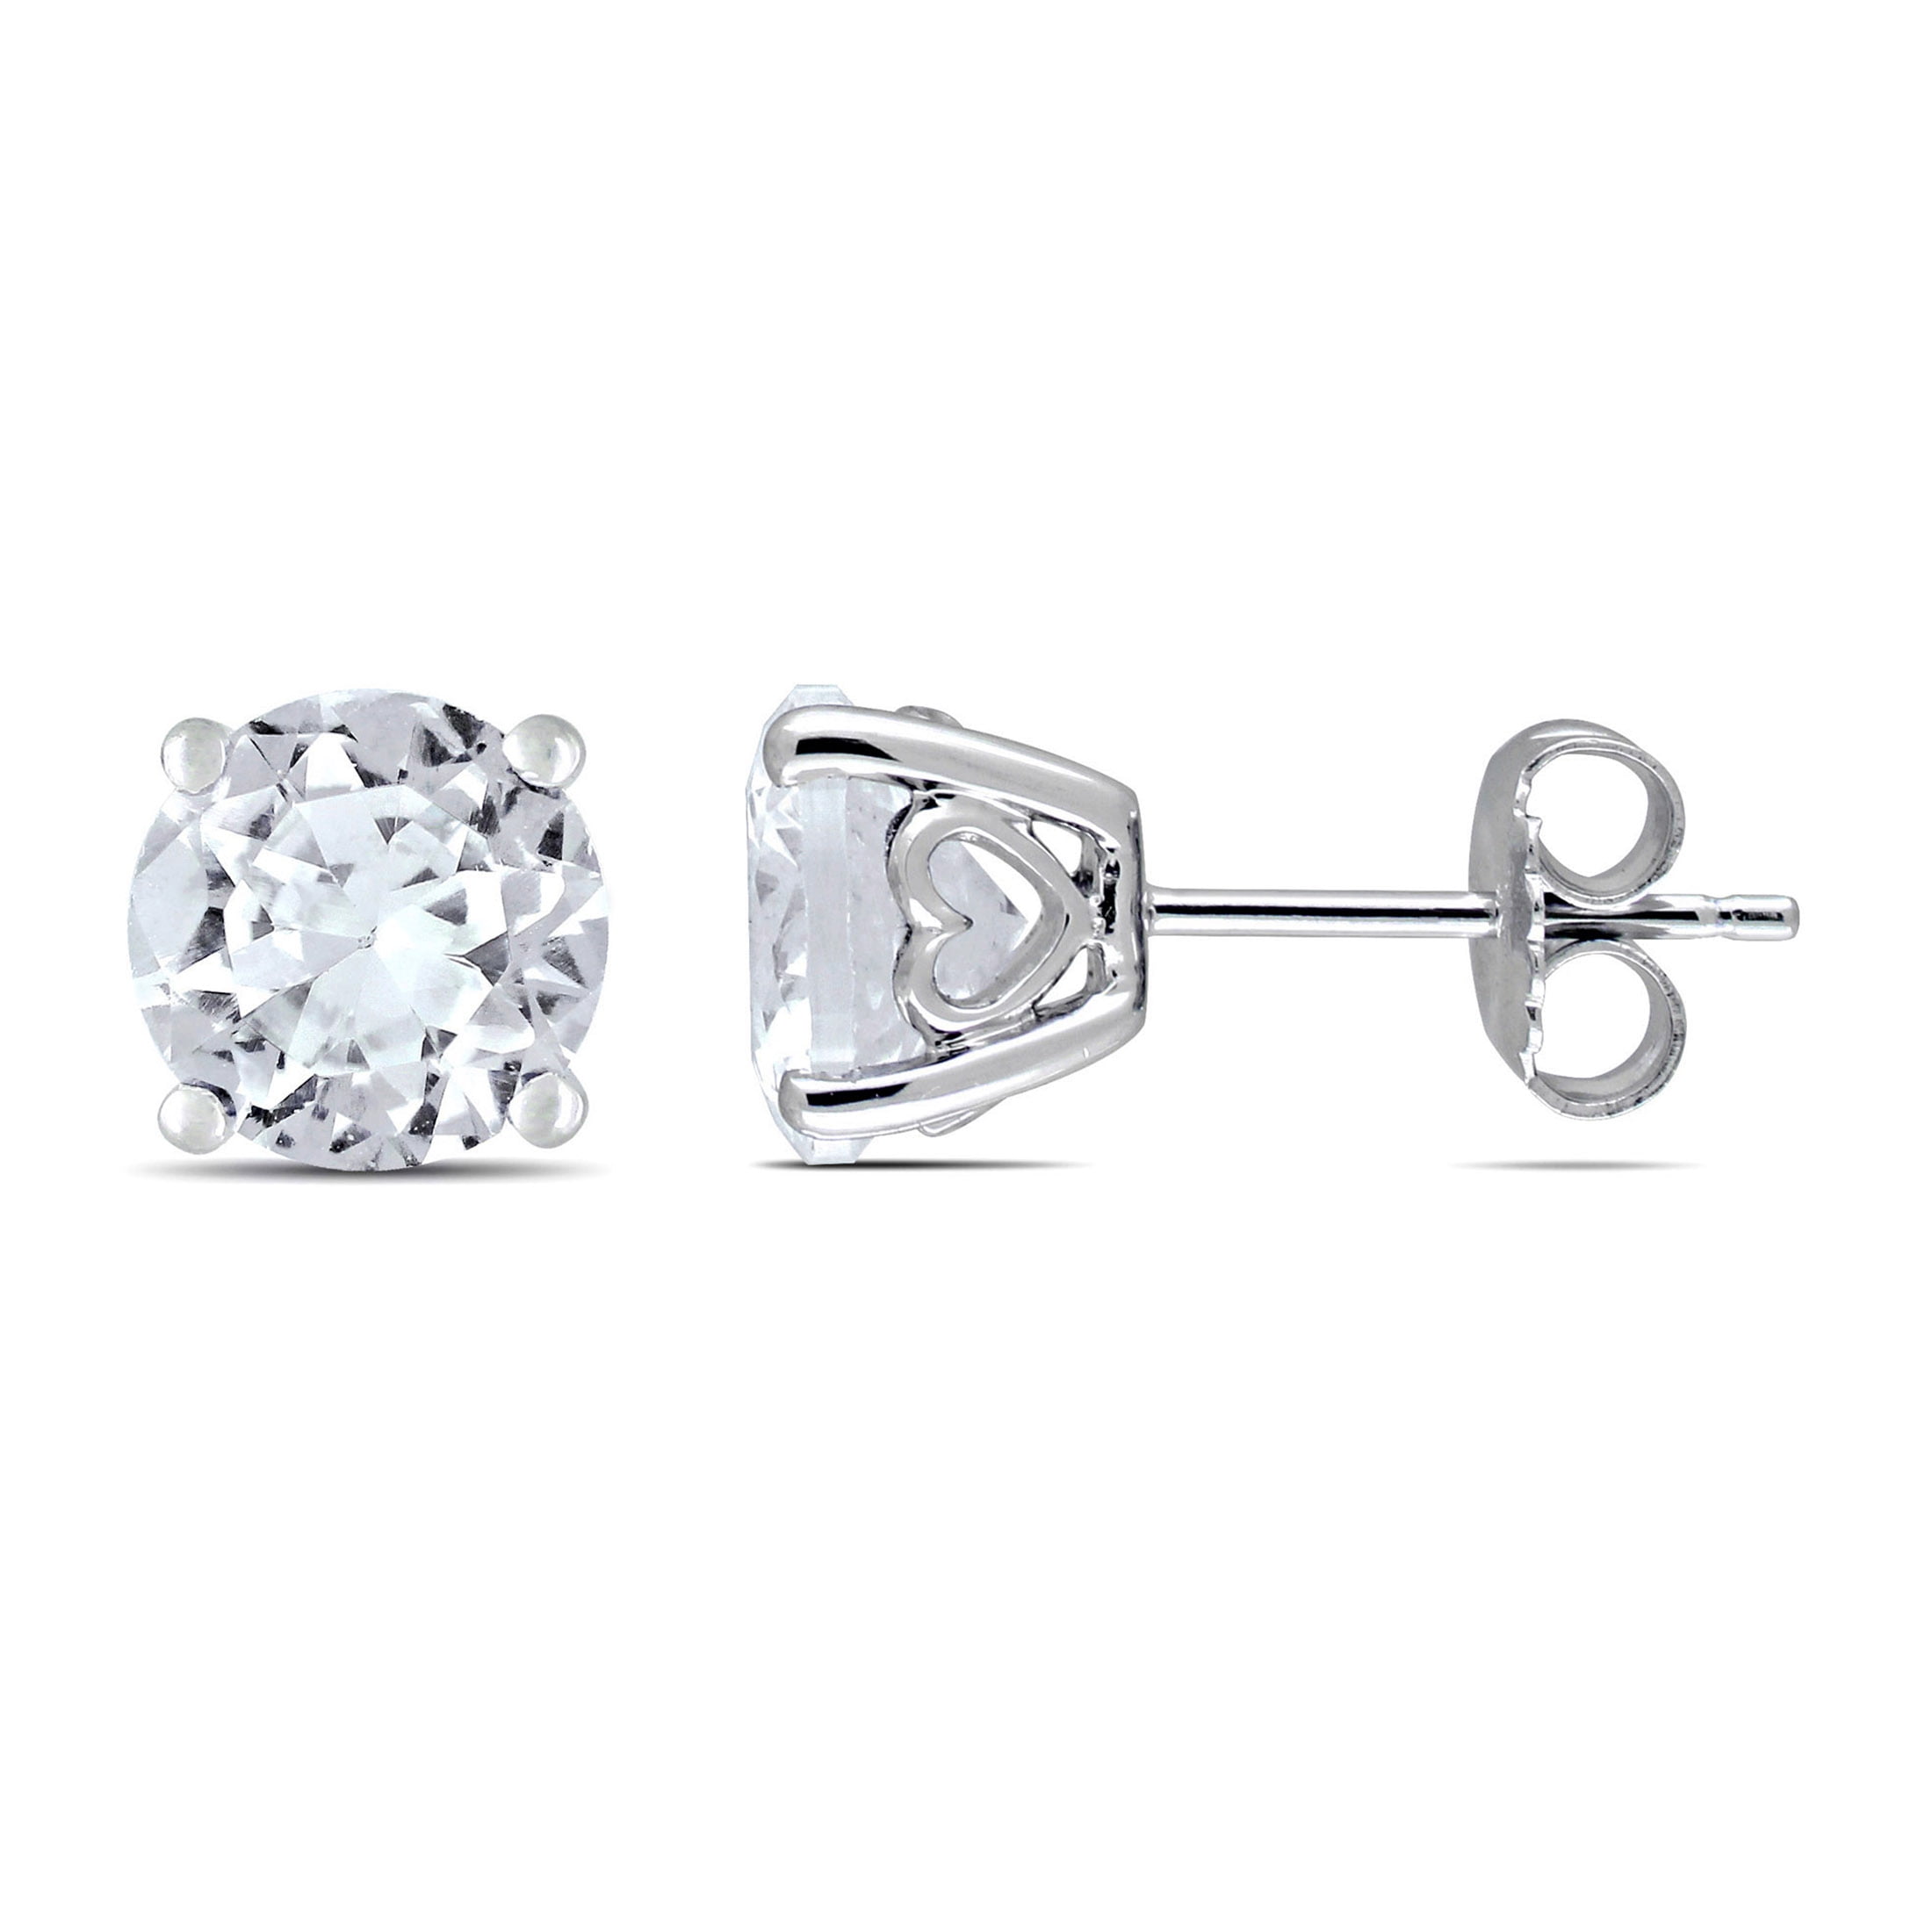 2Ct White Sapphire Solitaire Stud Earrings In 925 Sterling Silver 